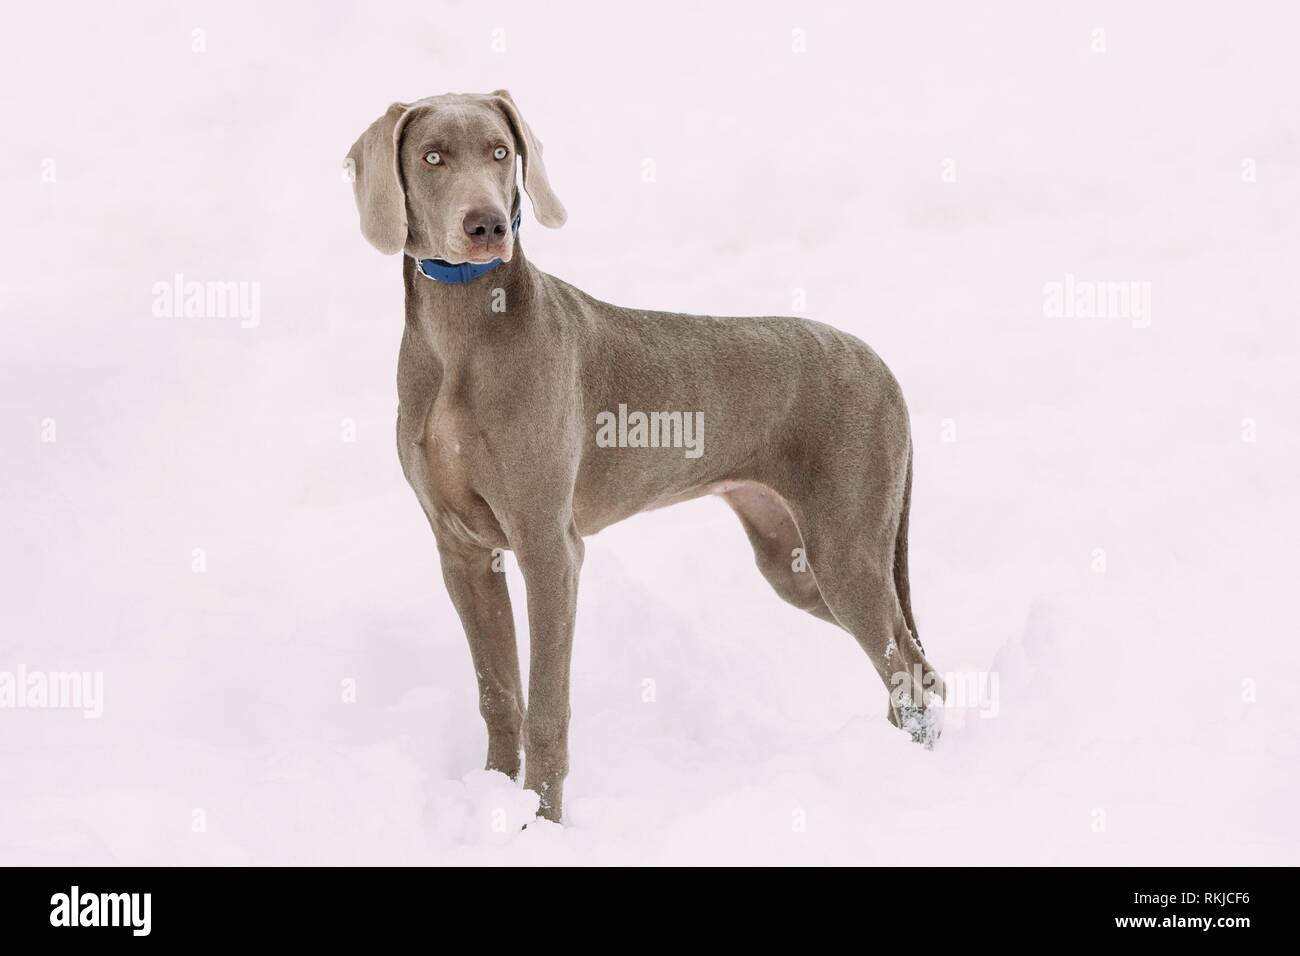 Beautiful Weimaraner Dog Standing In Snow At Winter Day. Large Dog Breds For Hunting. The Weimaraner Is An All-purpose Gun Dog. Stock Photo